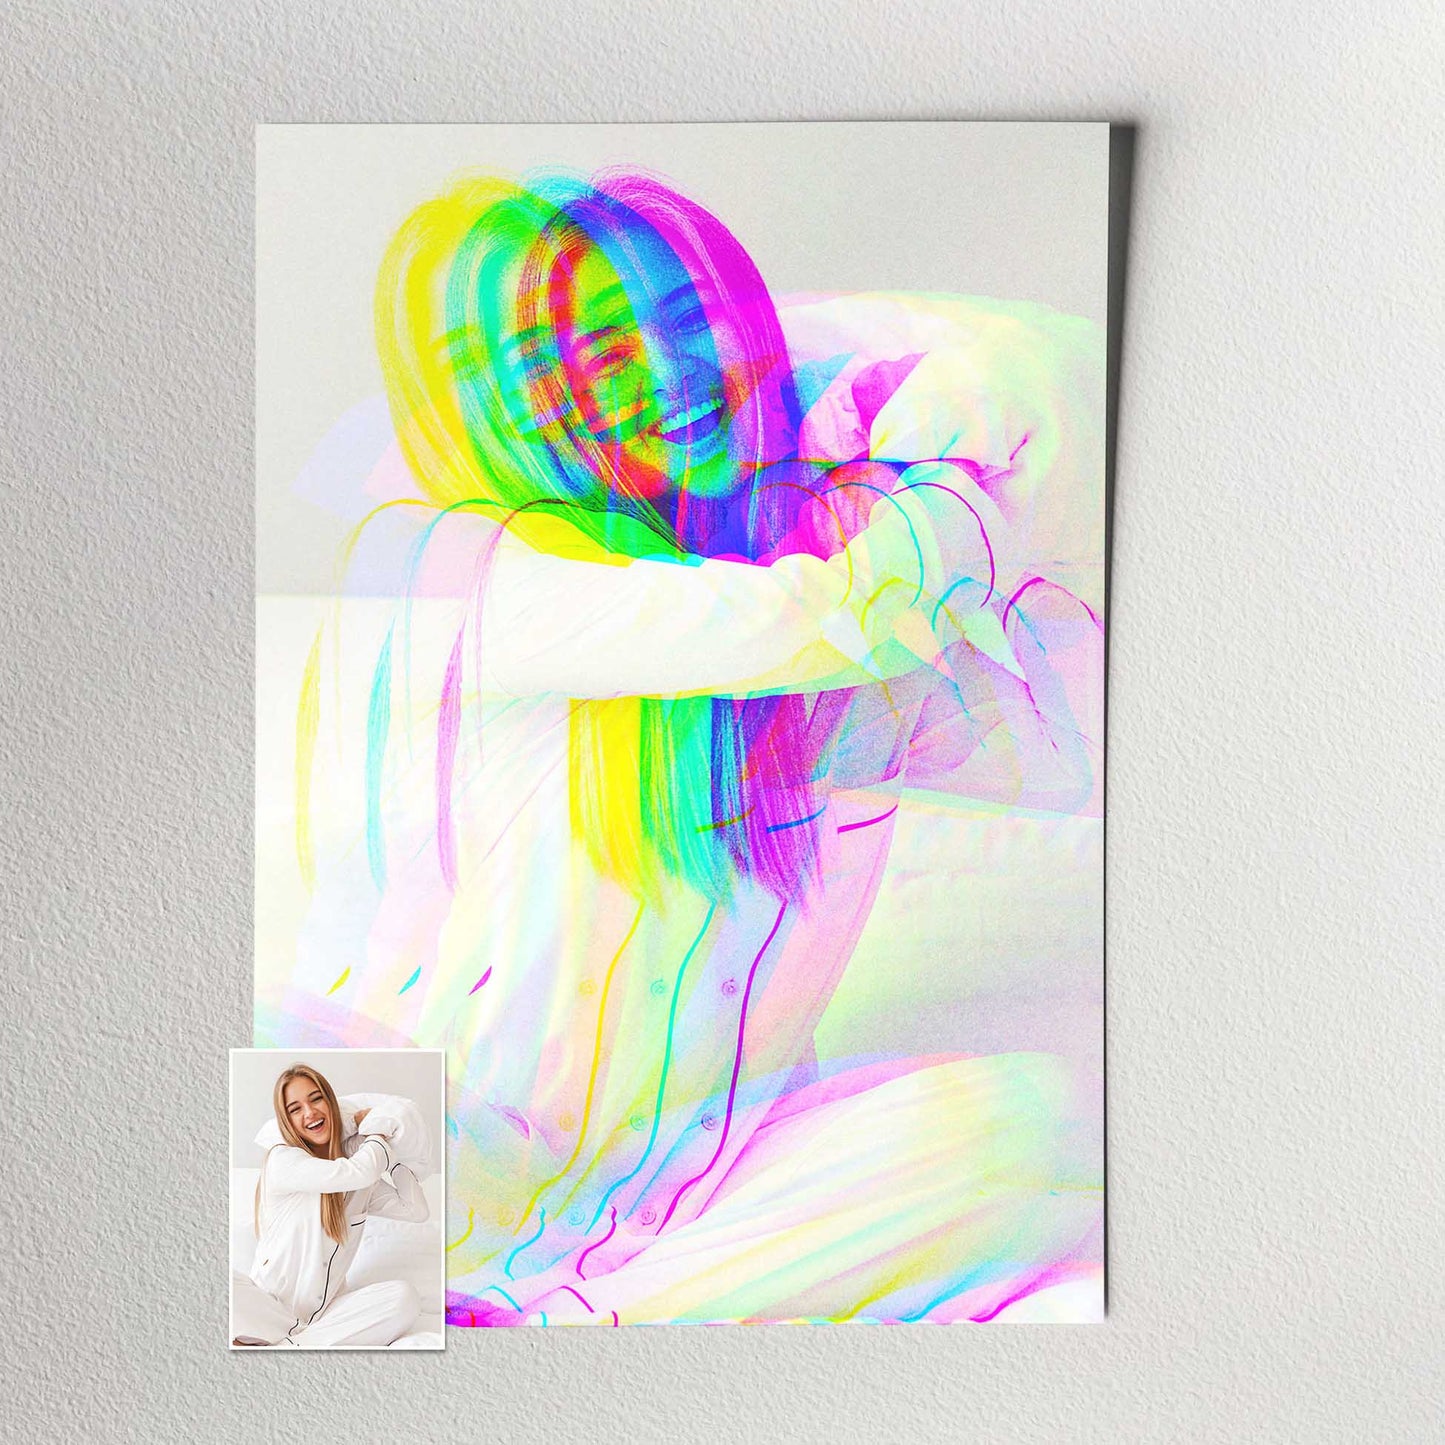 Introduce a touch of elegance to your home decor with our Personalised Anaglyph 3D Print. Its modern and chic design, complemented by a 3D filter effect, creates a cool and beautiful artwork that is both timeless and gallery quality